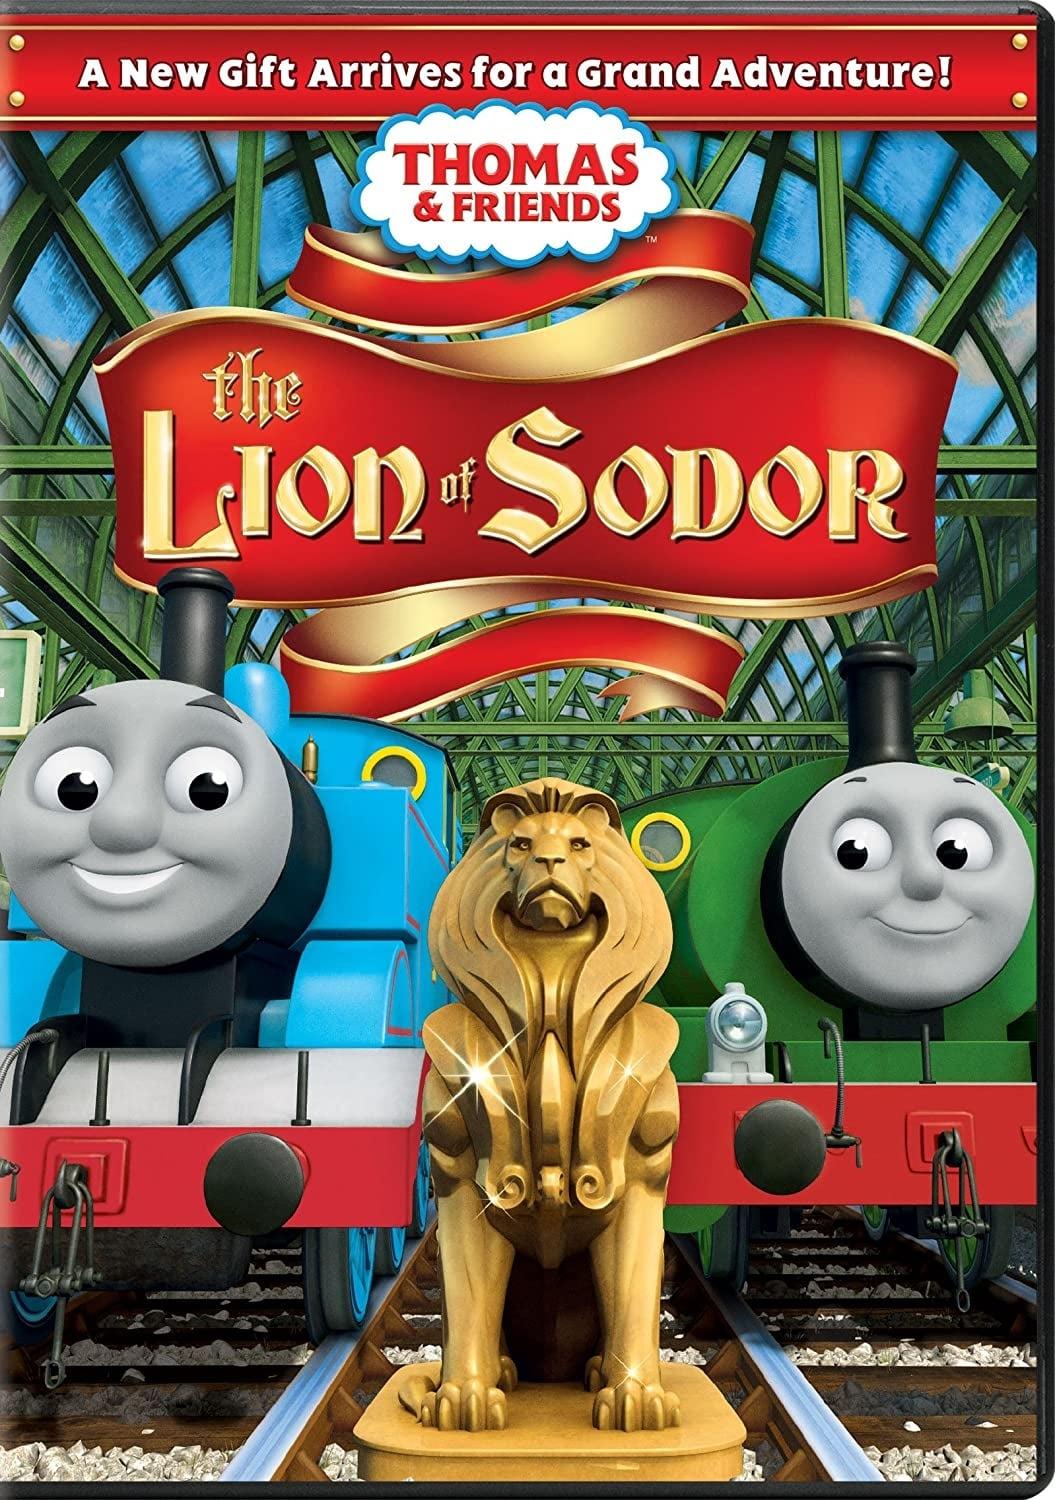 Thomas & Friends: The Lion of Sodor poster